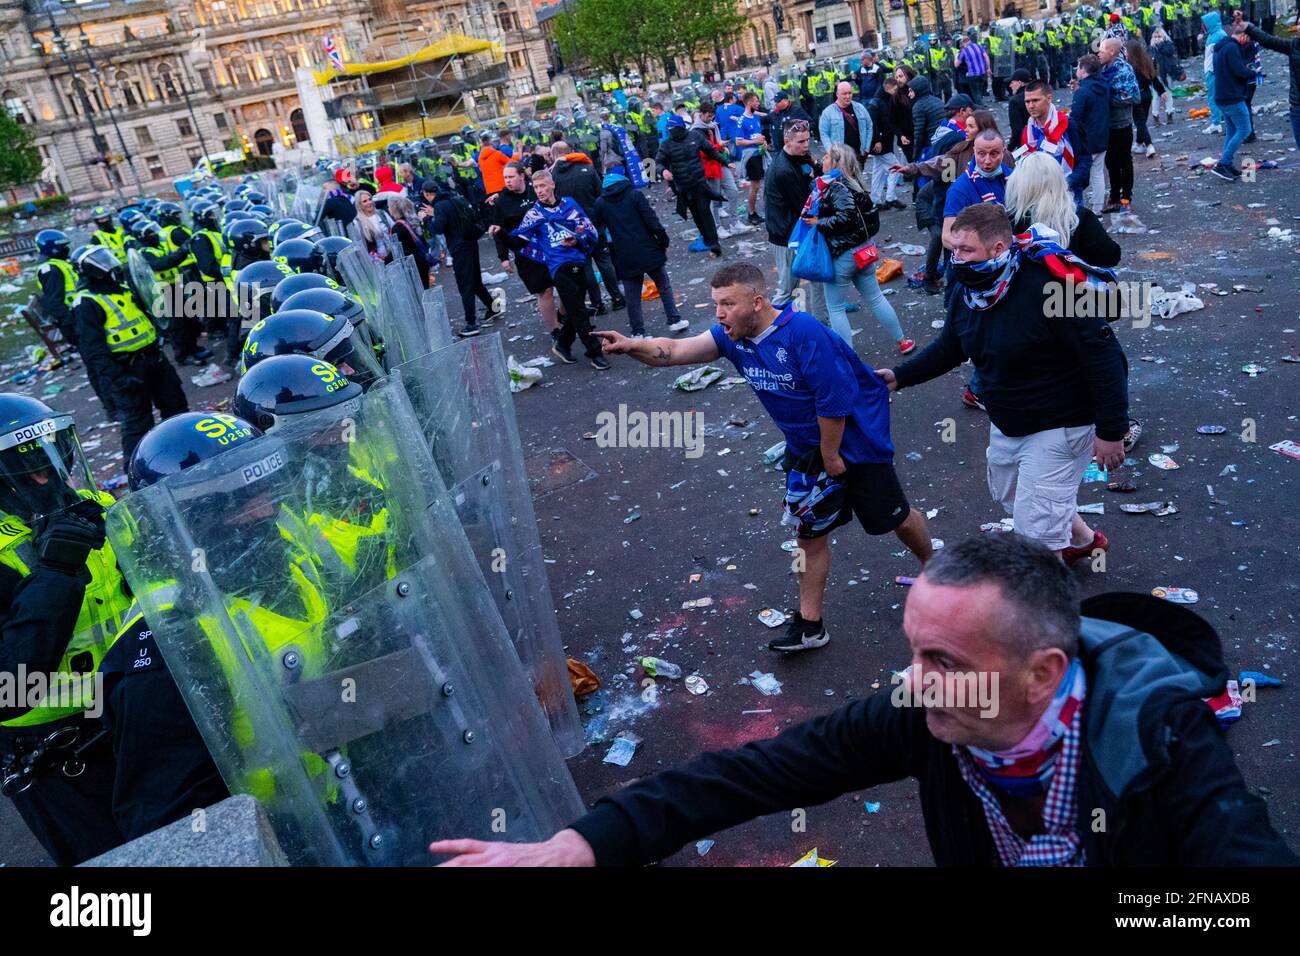 Glasgow, Scotland, UK. 15 May 202. Rangers football supporters  celebrating 55th league victory are cleared from George Square by police in riot gear on Saturday evening. In very violent scenes police were pelted with bottles and items from a nearby construction site as police pushed the supporters into the south west corner of the square. Pic; Police are confronted by angry Rangers fans. Iain Masterton/Alamy Live News. Stock Photo